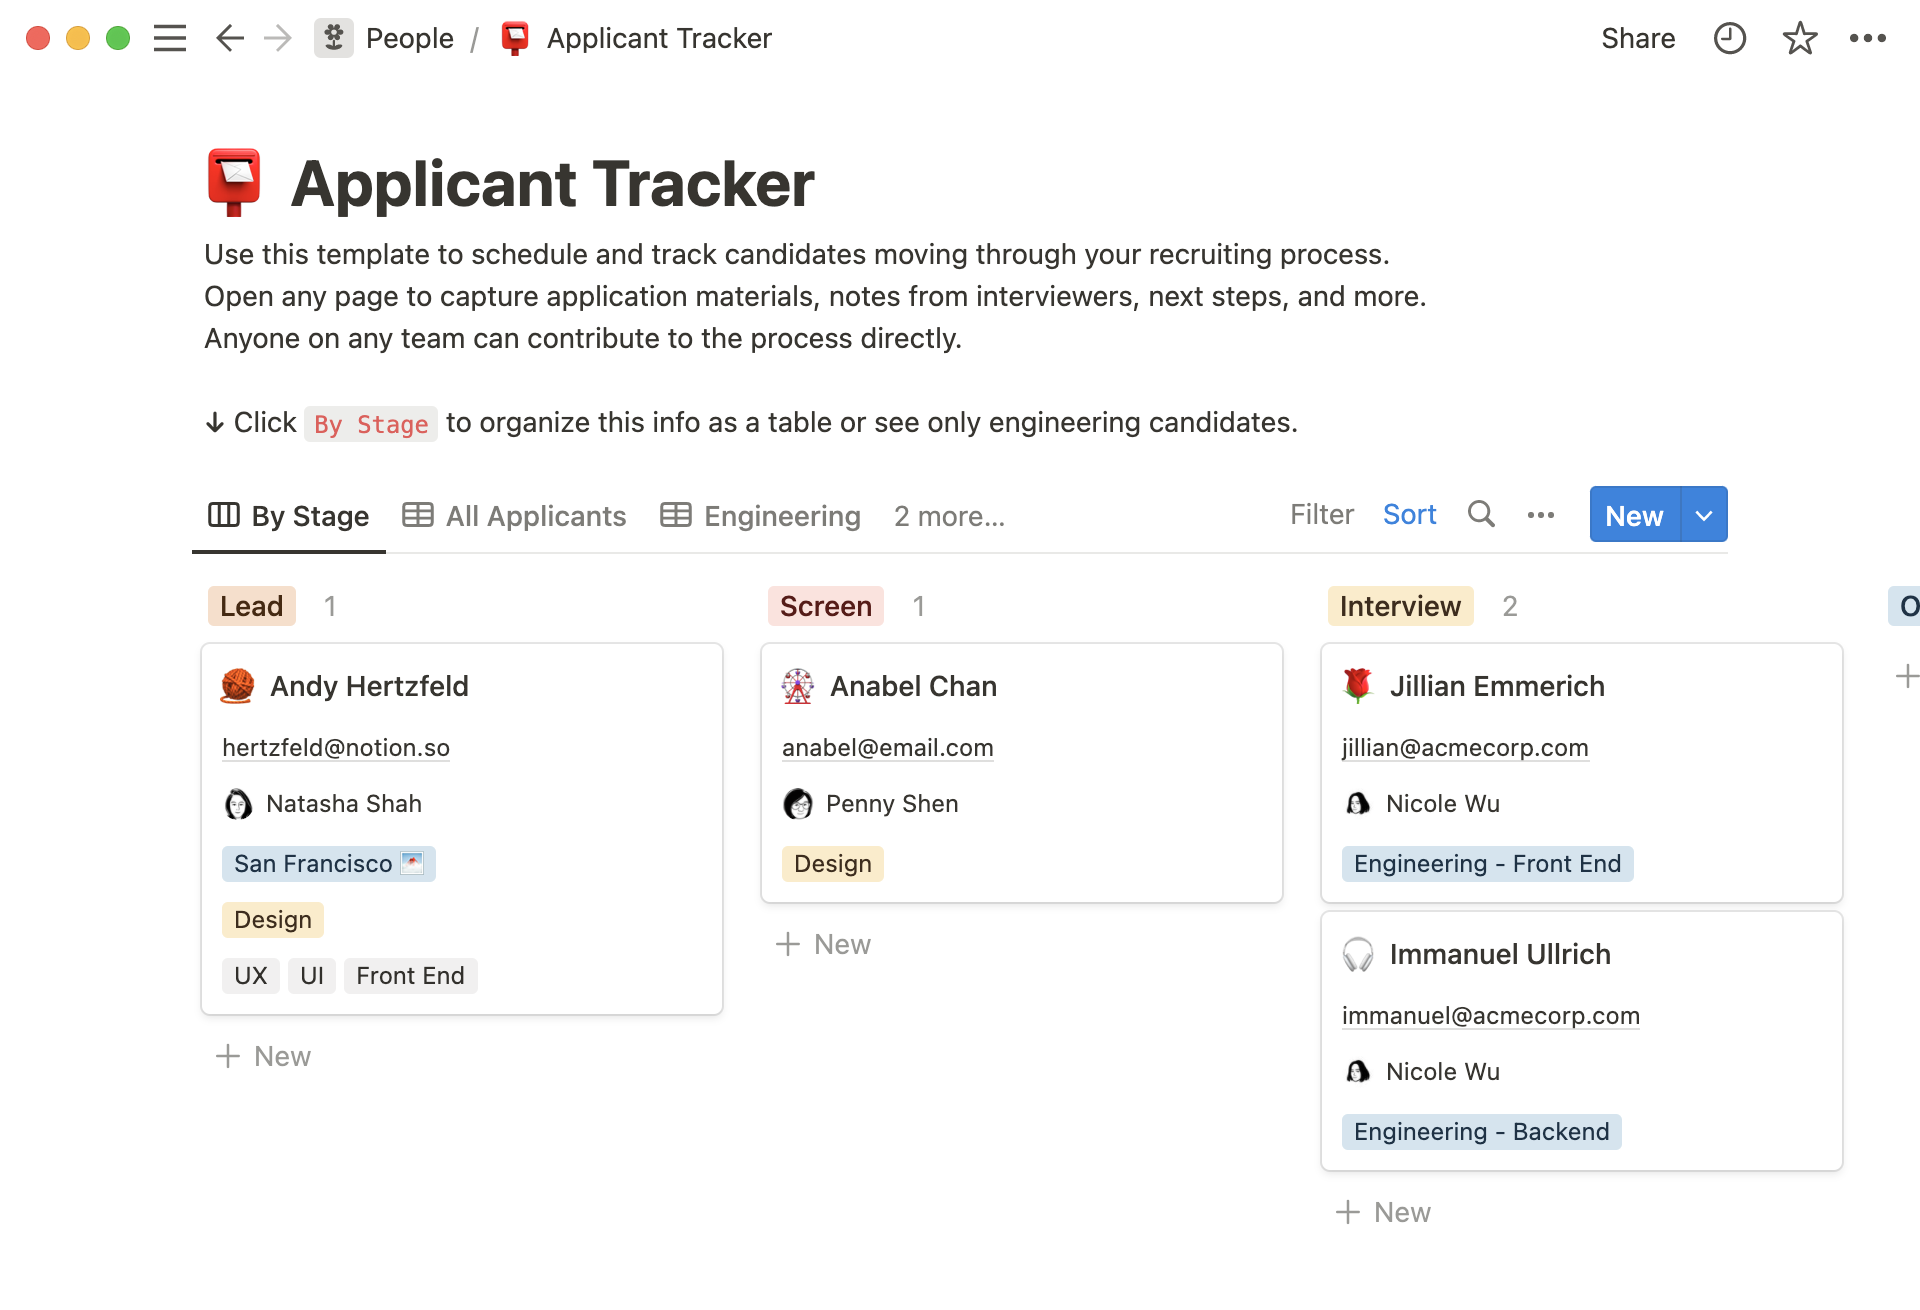 Create an applicant tracker like this to manage candidates for your open roles.